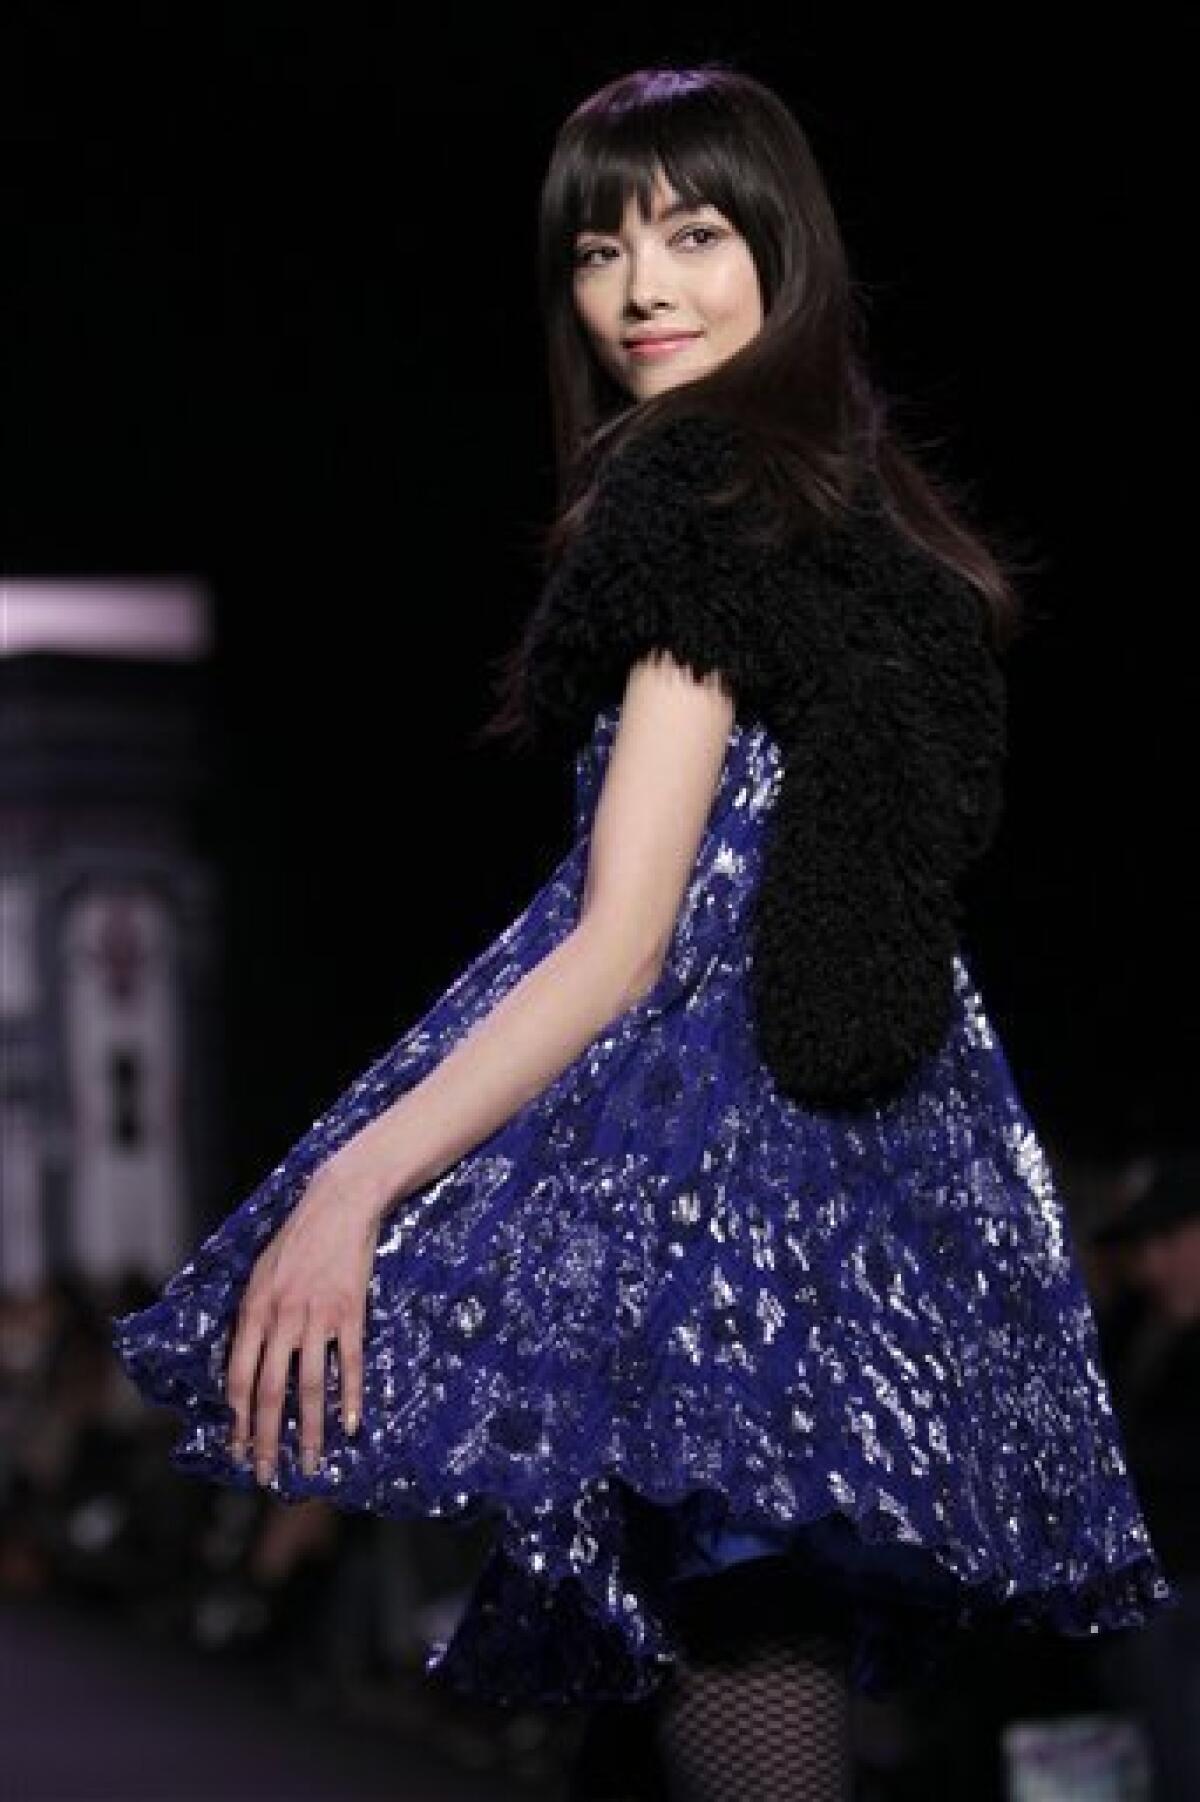 Fall 2011 fashion from Anna Sui is modeled during Fashion Week in New York, Wednesday, Feb. 16, 2011. (AP Photo/Seth Wenig)